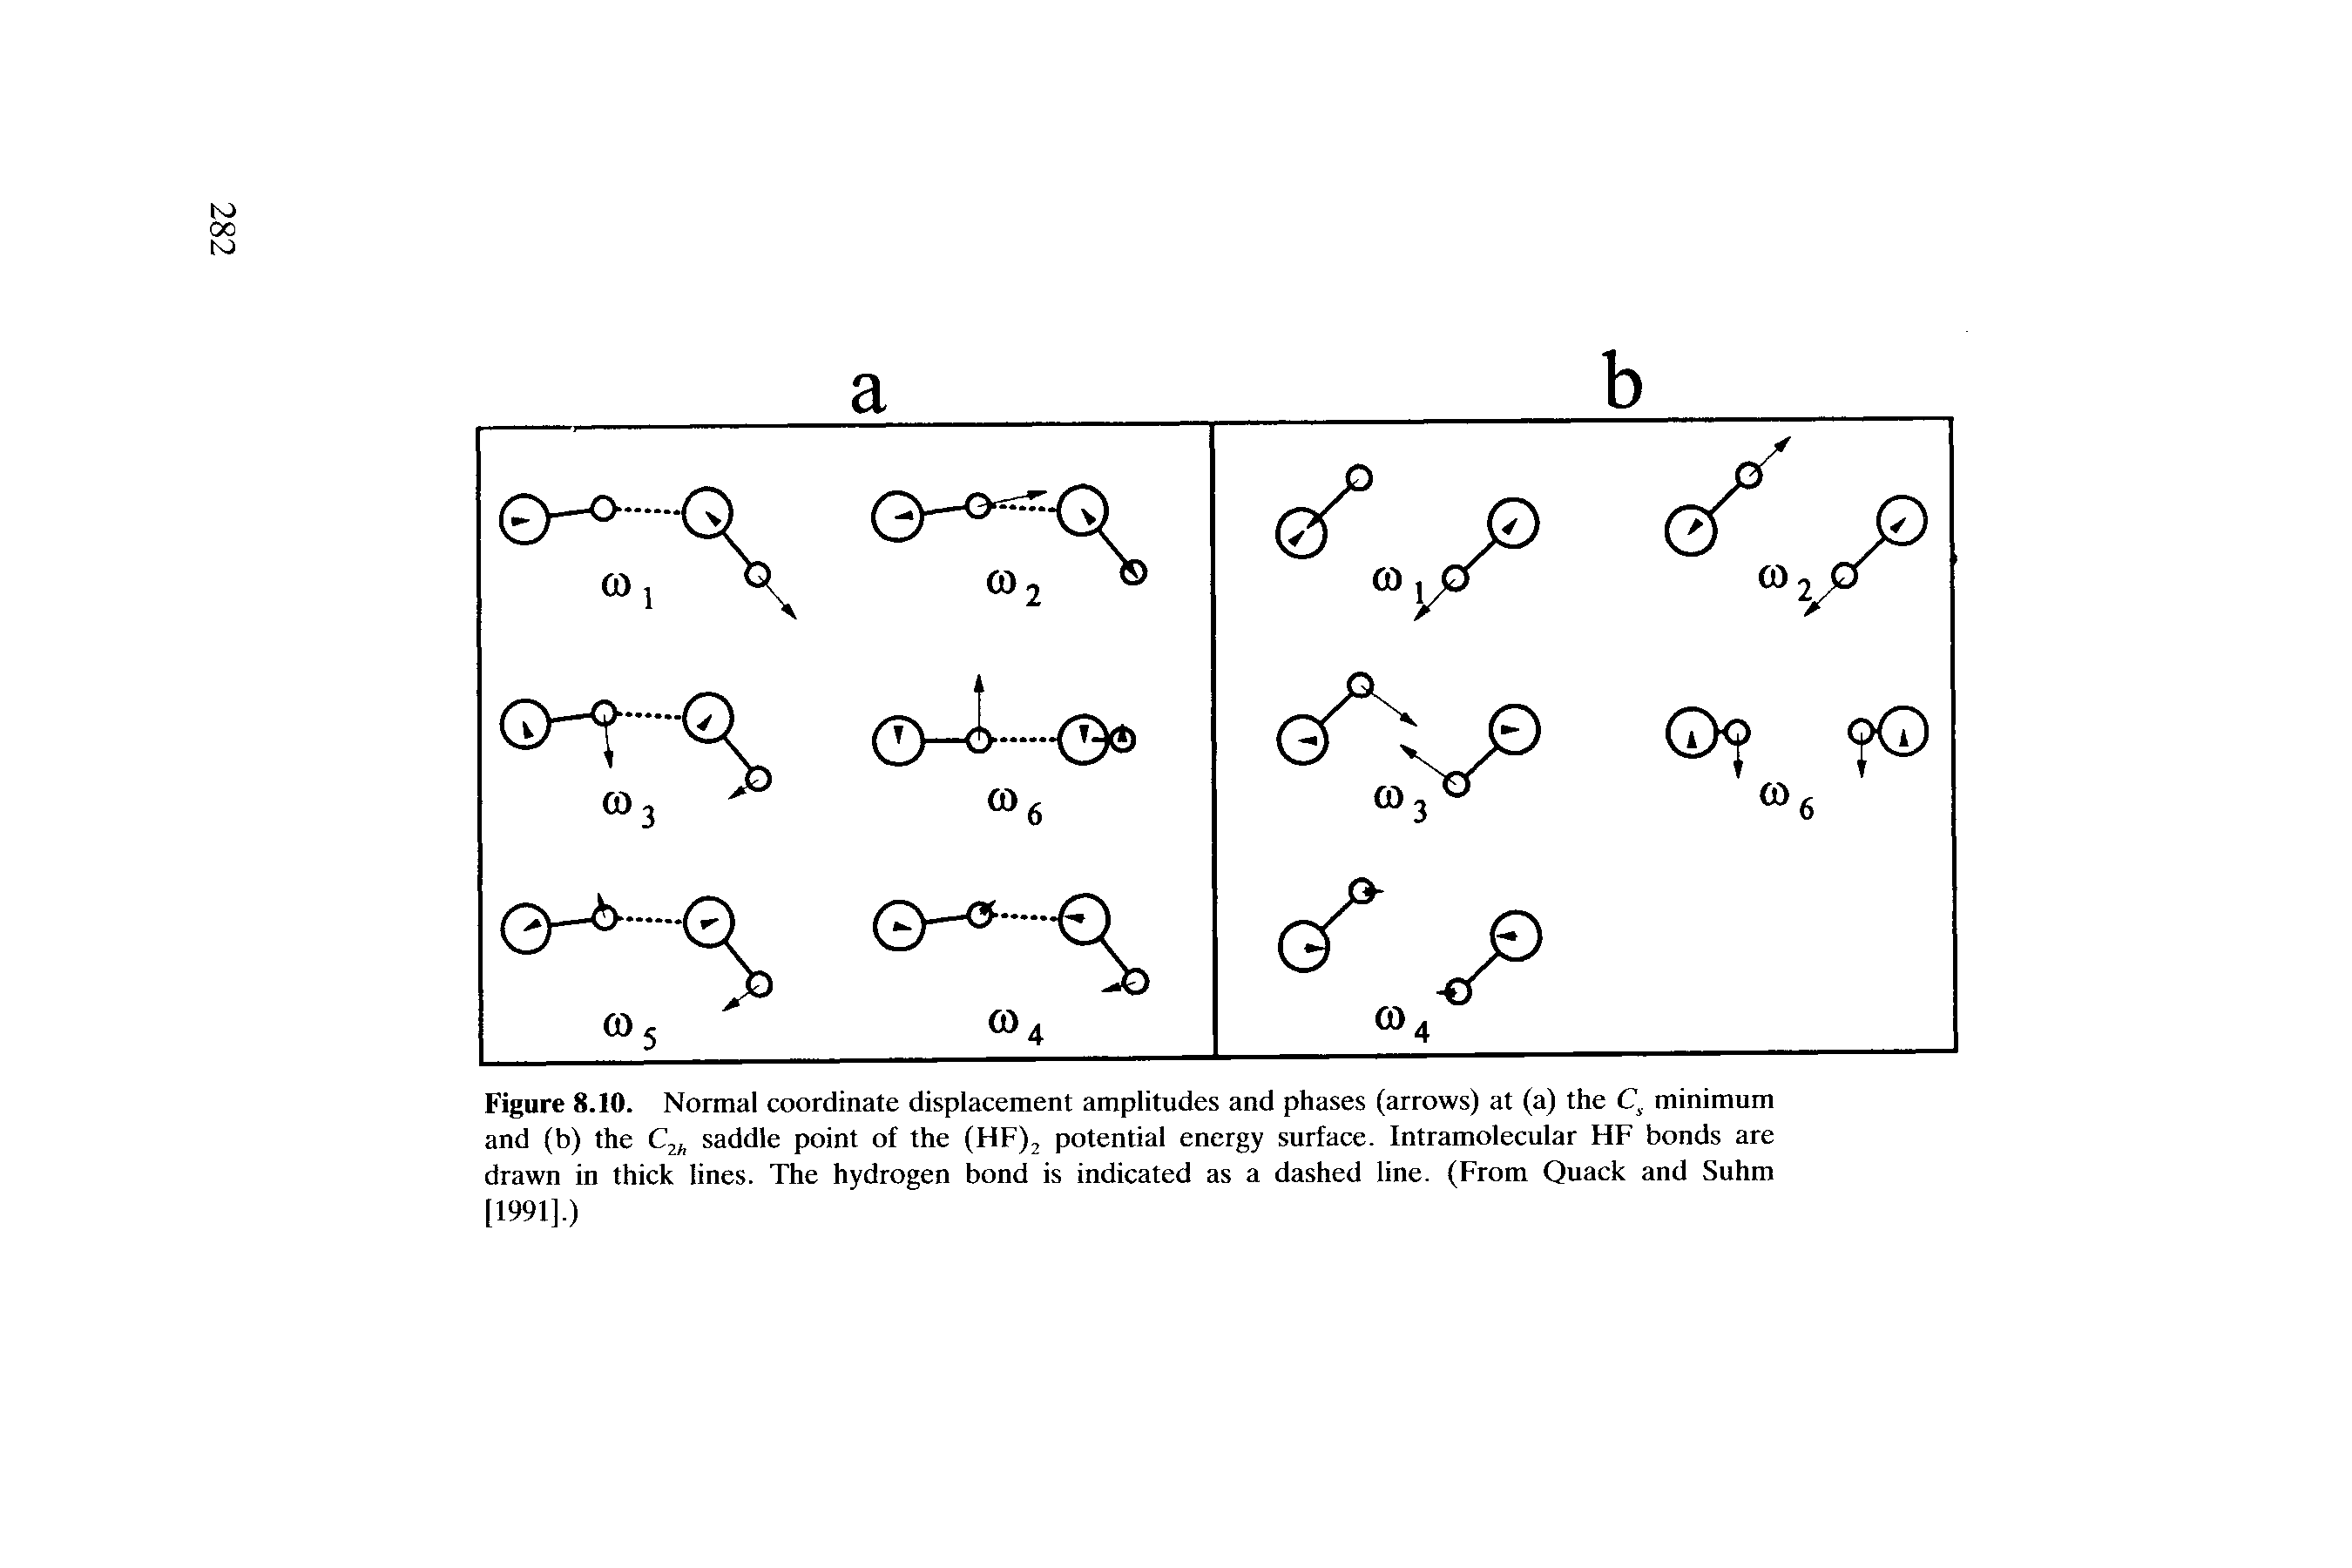 Figure 8.10. Normal coordinate displacement amplitudes and phases (arrows) at (a) the Cs minimum and (b) the C2h saddle point of the (HF)2 potential energy surface. Intramolecular HF bonds are drawn in thick lines. The hydrogen bond is indicated as a dashed line. (From Quack and Suhm [1991].)...